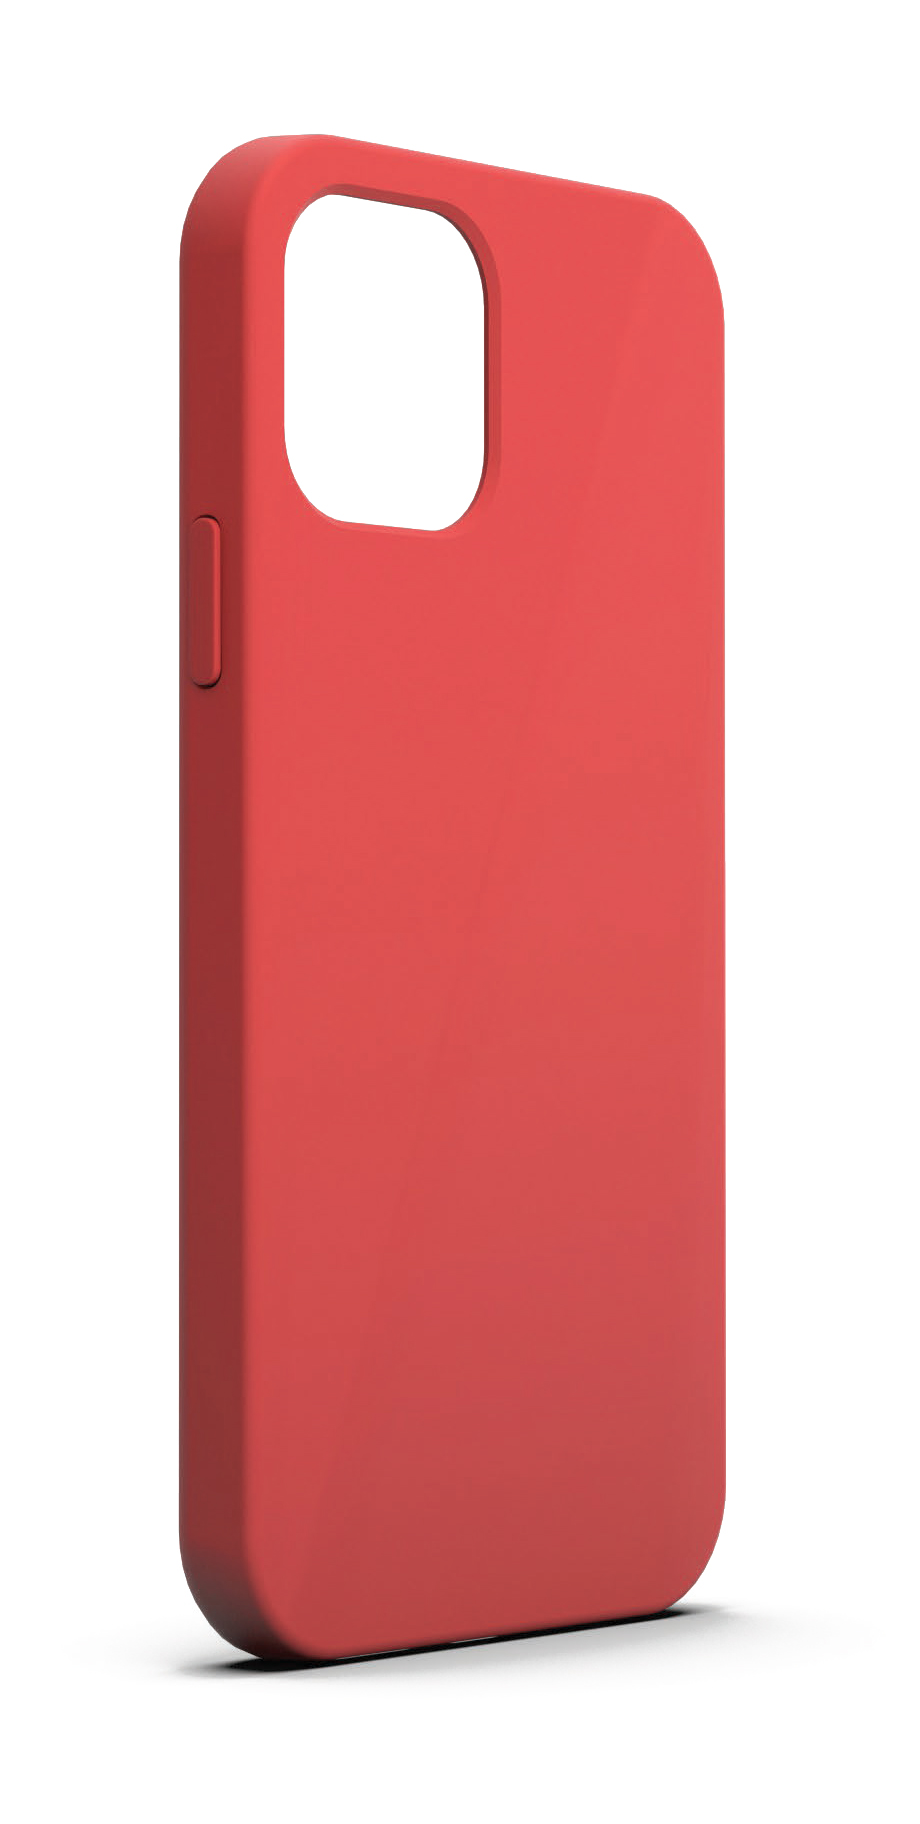 47_1624554548_CASE-iPhone-12-SILICONE-magcharger-7